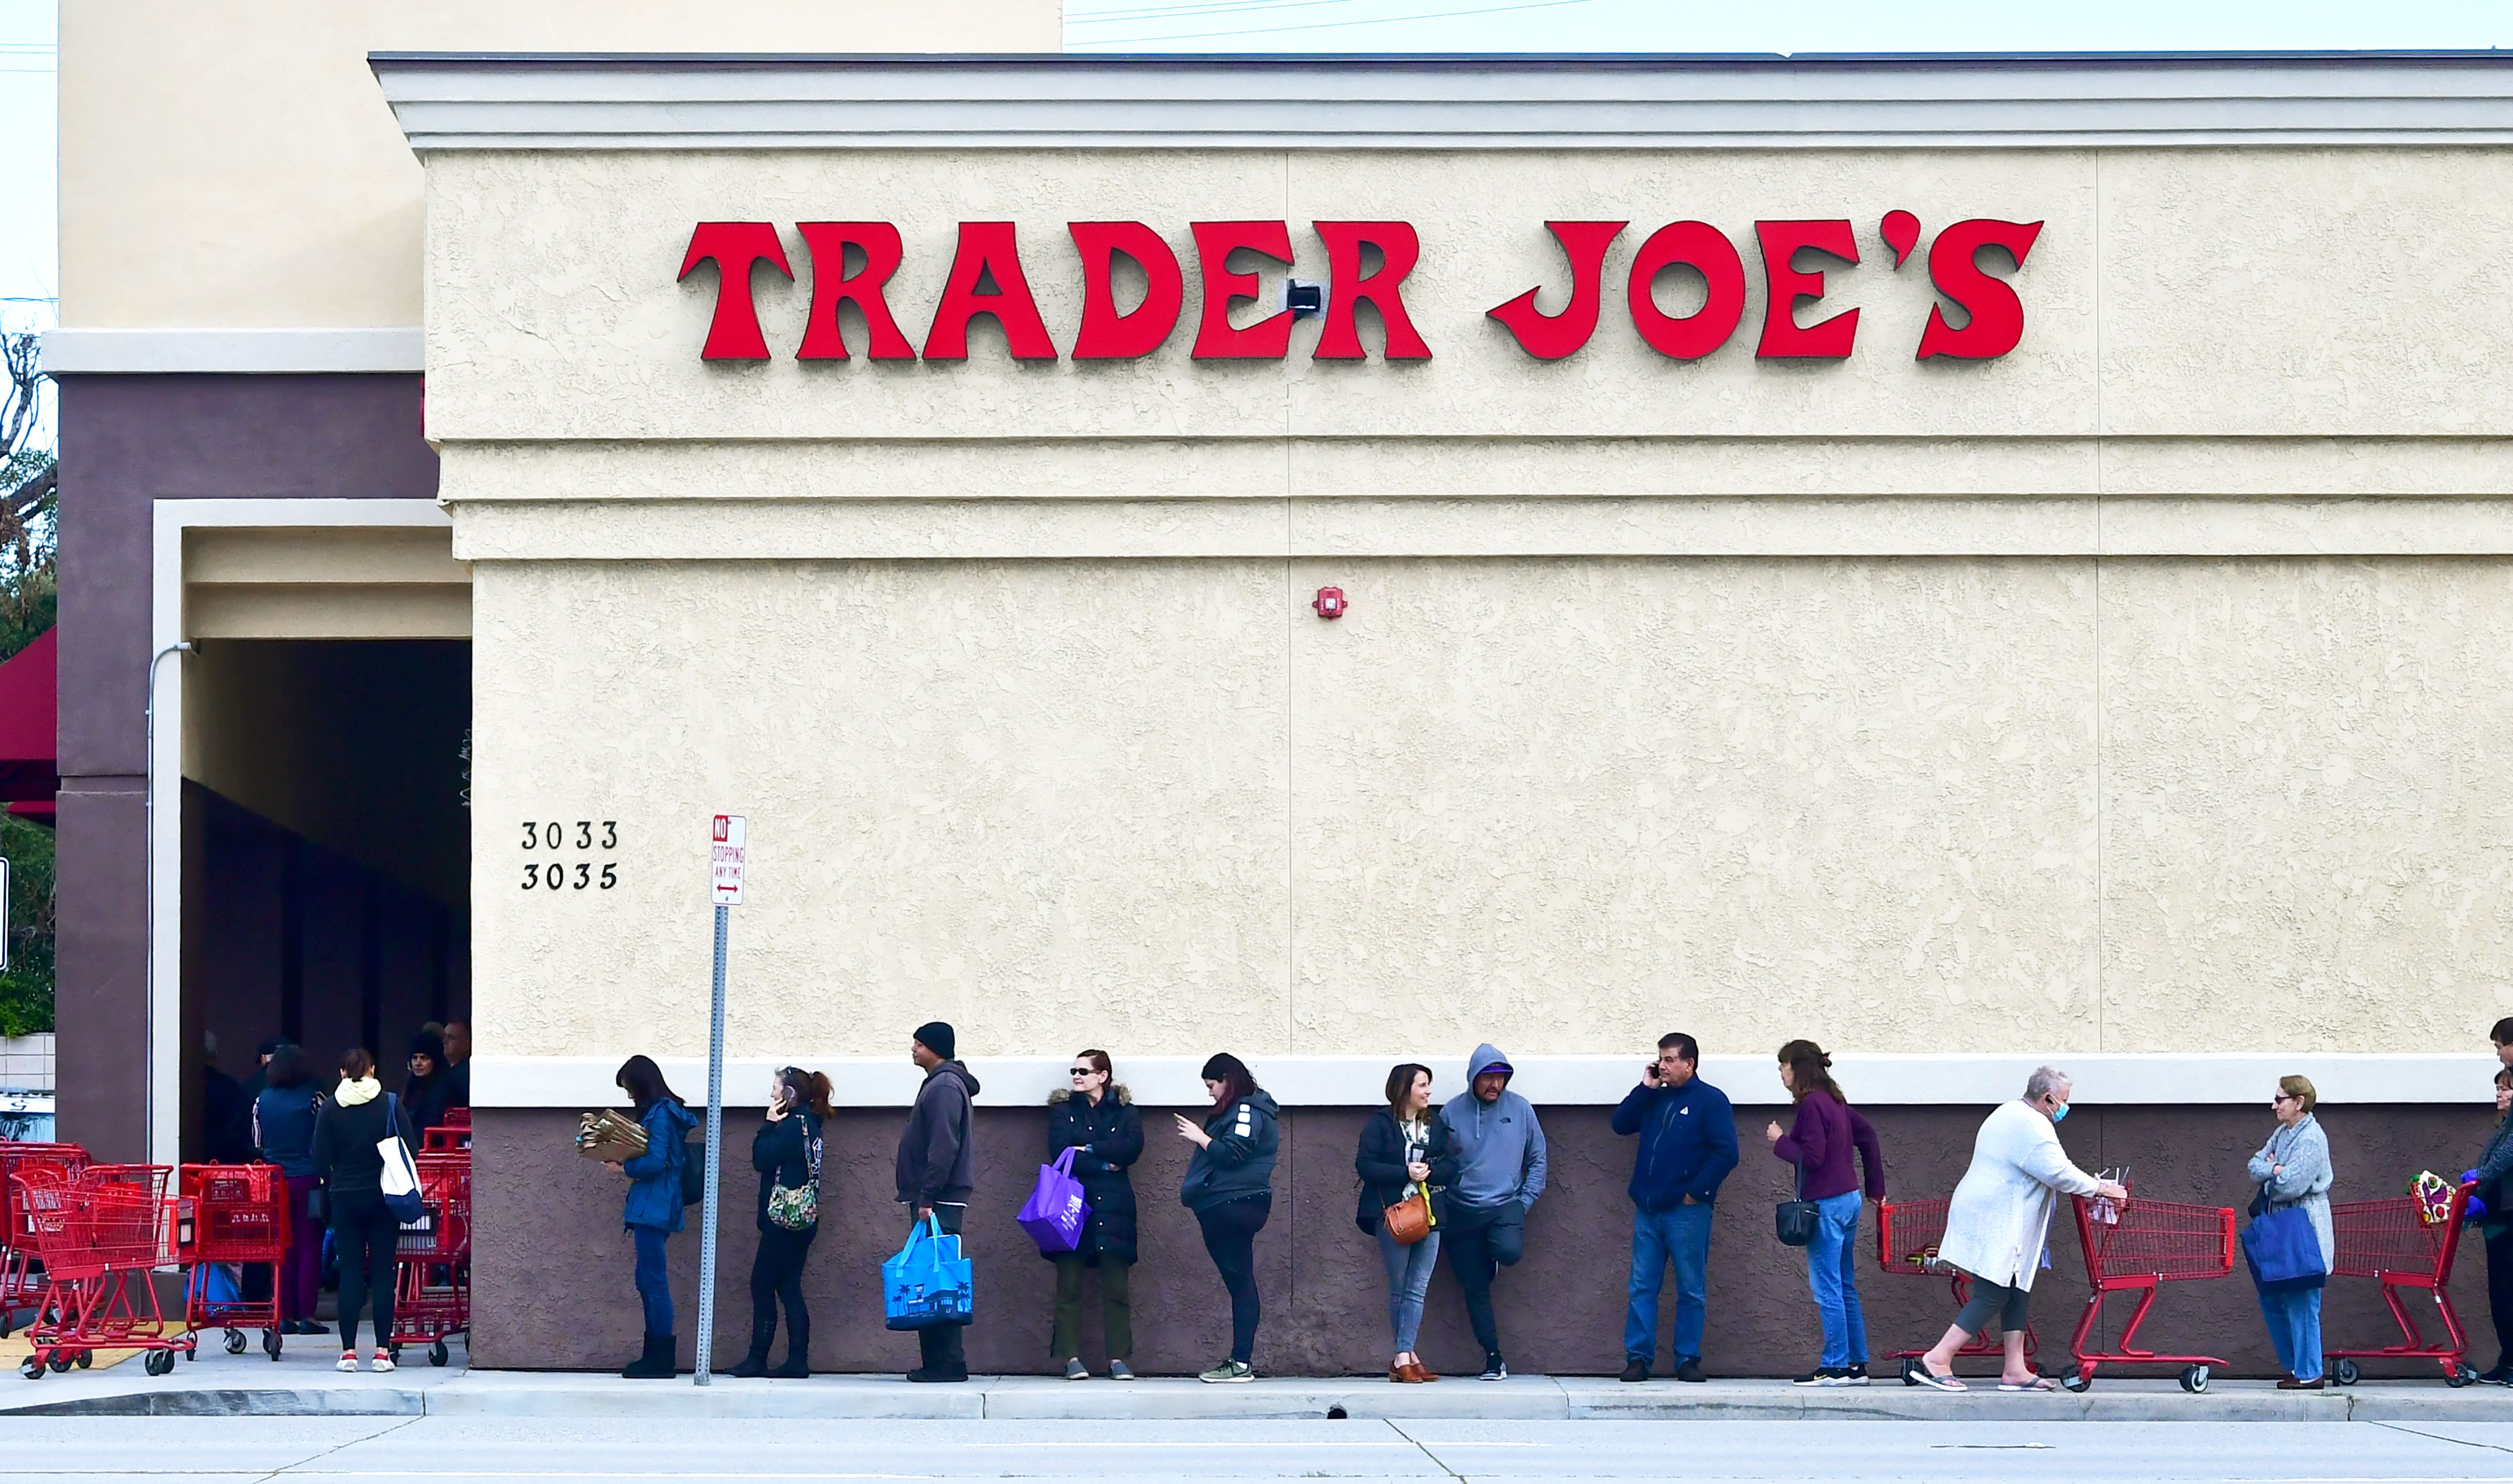 A woman wearing a facemask pushes her cart to the back of the line as people line up before the opening of a Trader Joe's store in Pasadena, Caifornia on March 18, 2020 (Photo by FREDERIC J. BROWN/AFP via Getty Images)